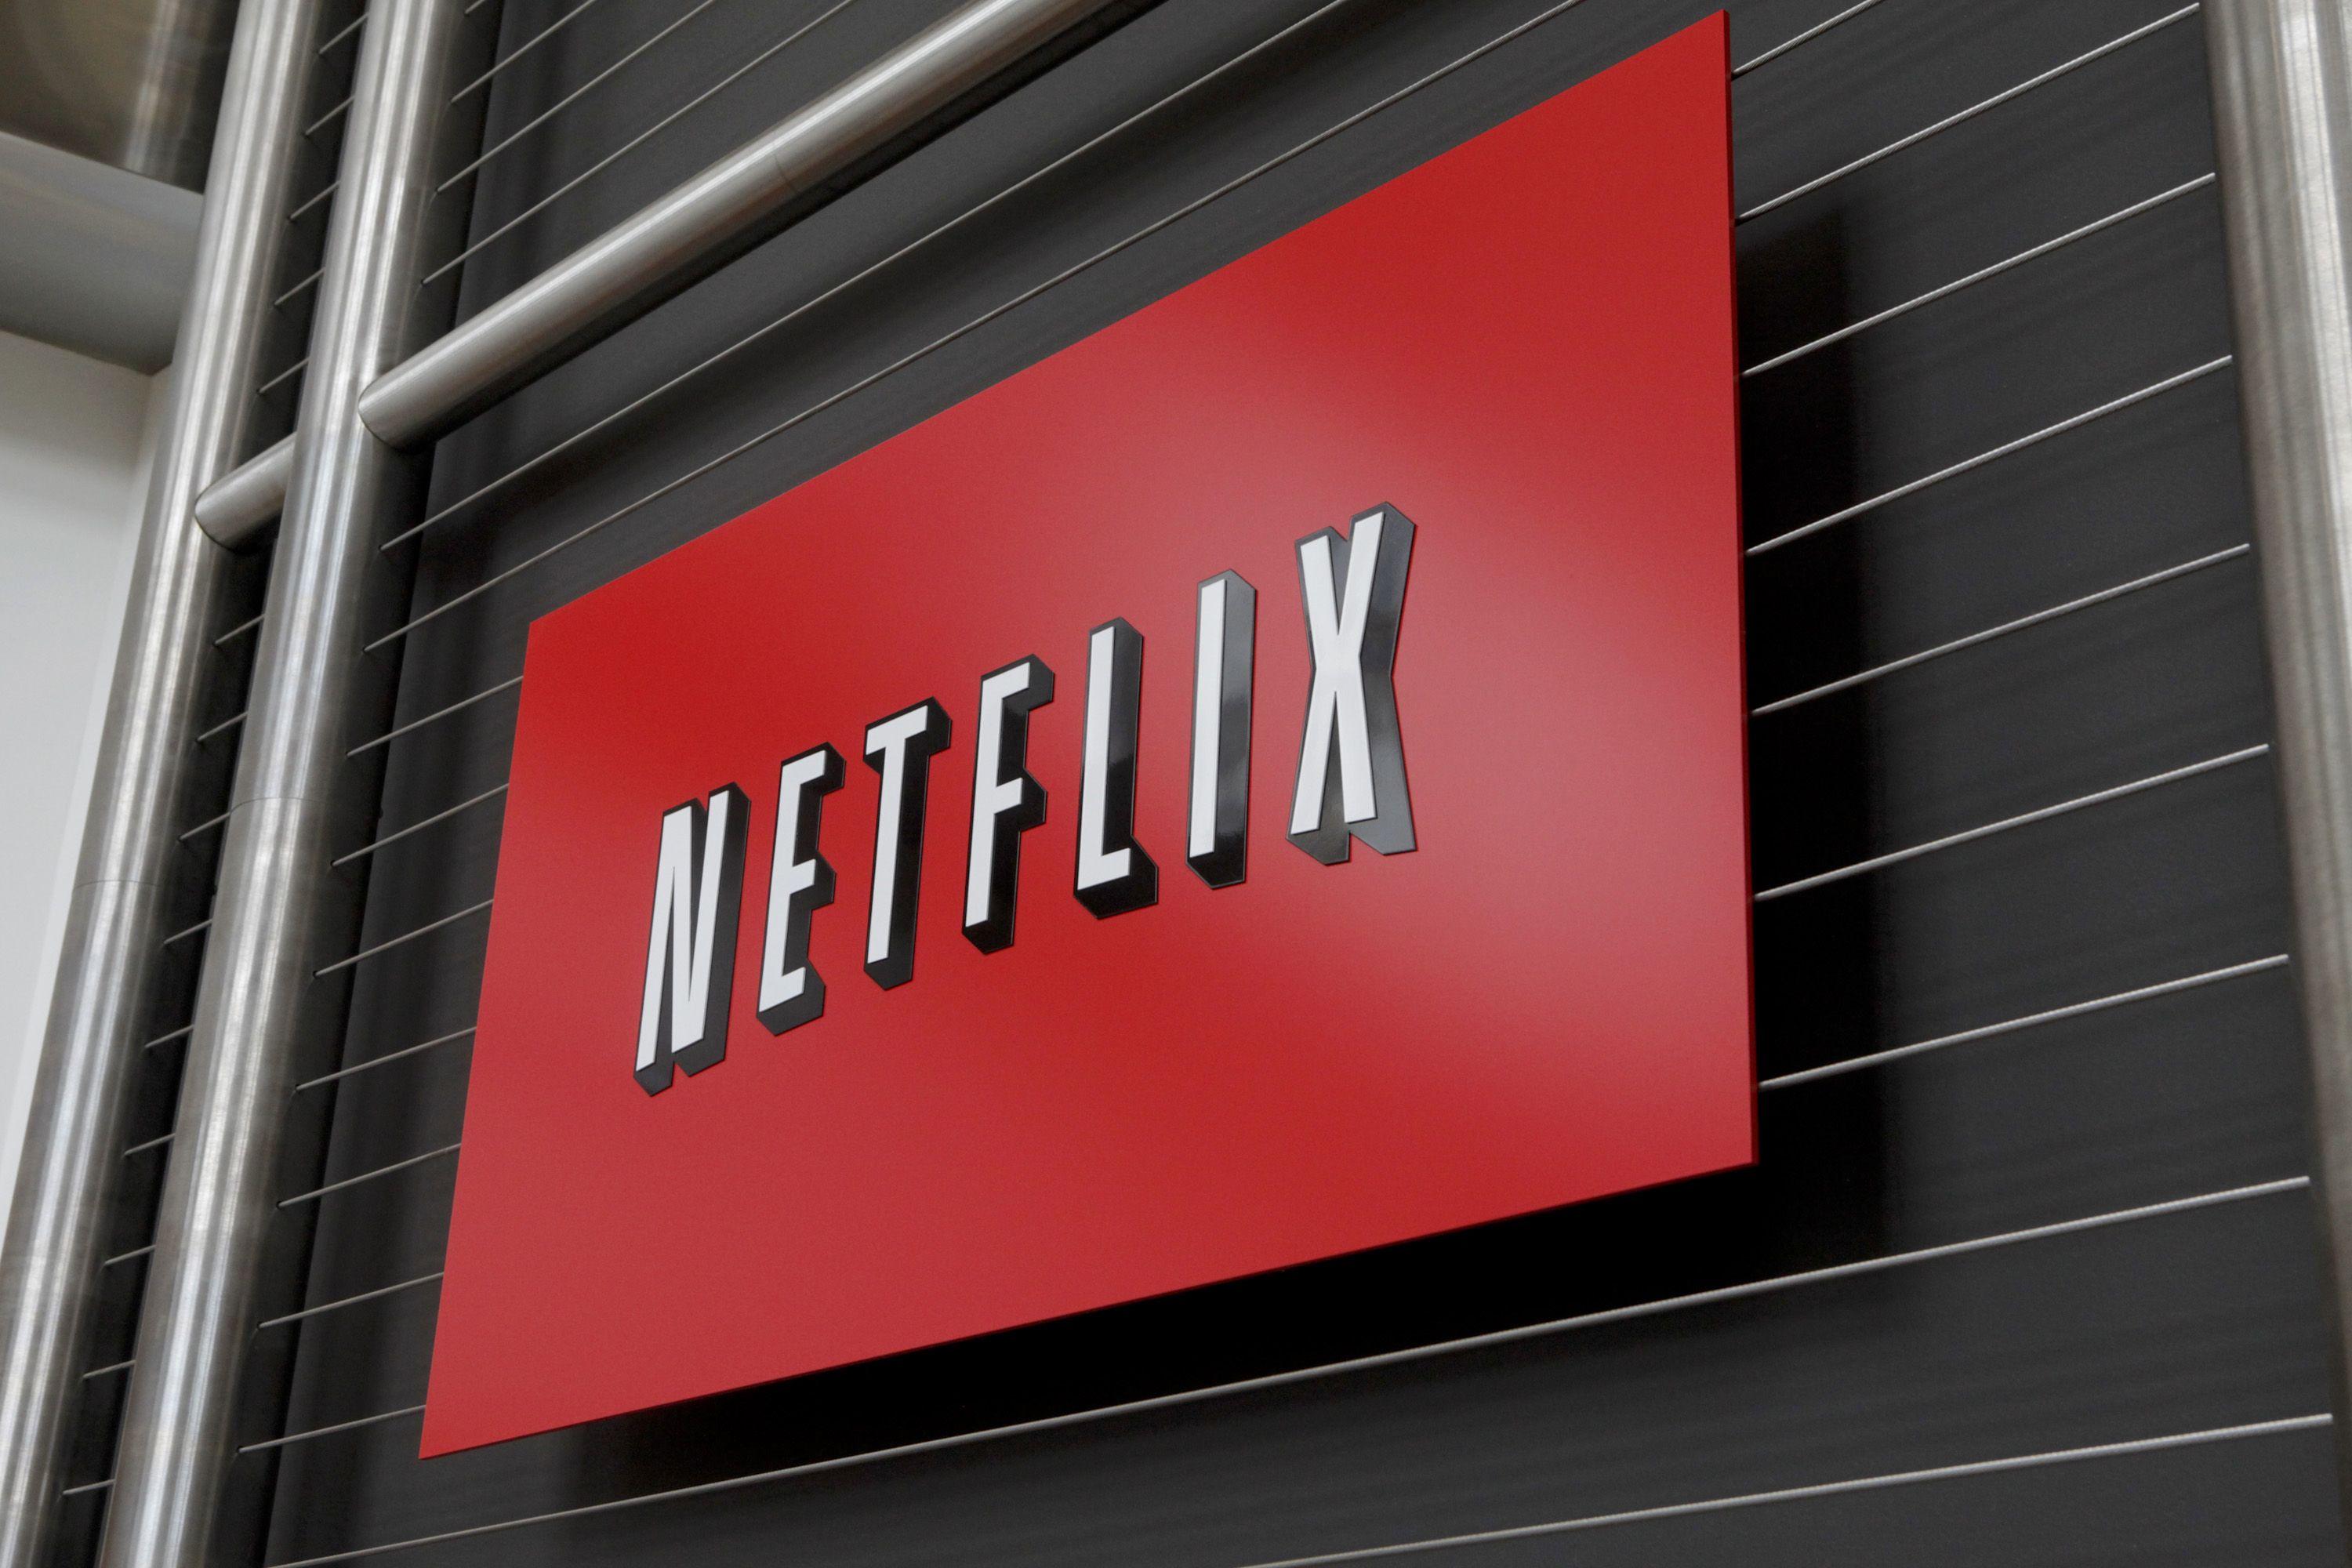 First Netflix Logo - Netflix Allows Unlimited Maternity, Paternity Leave For First Year ...